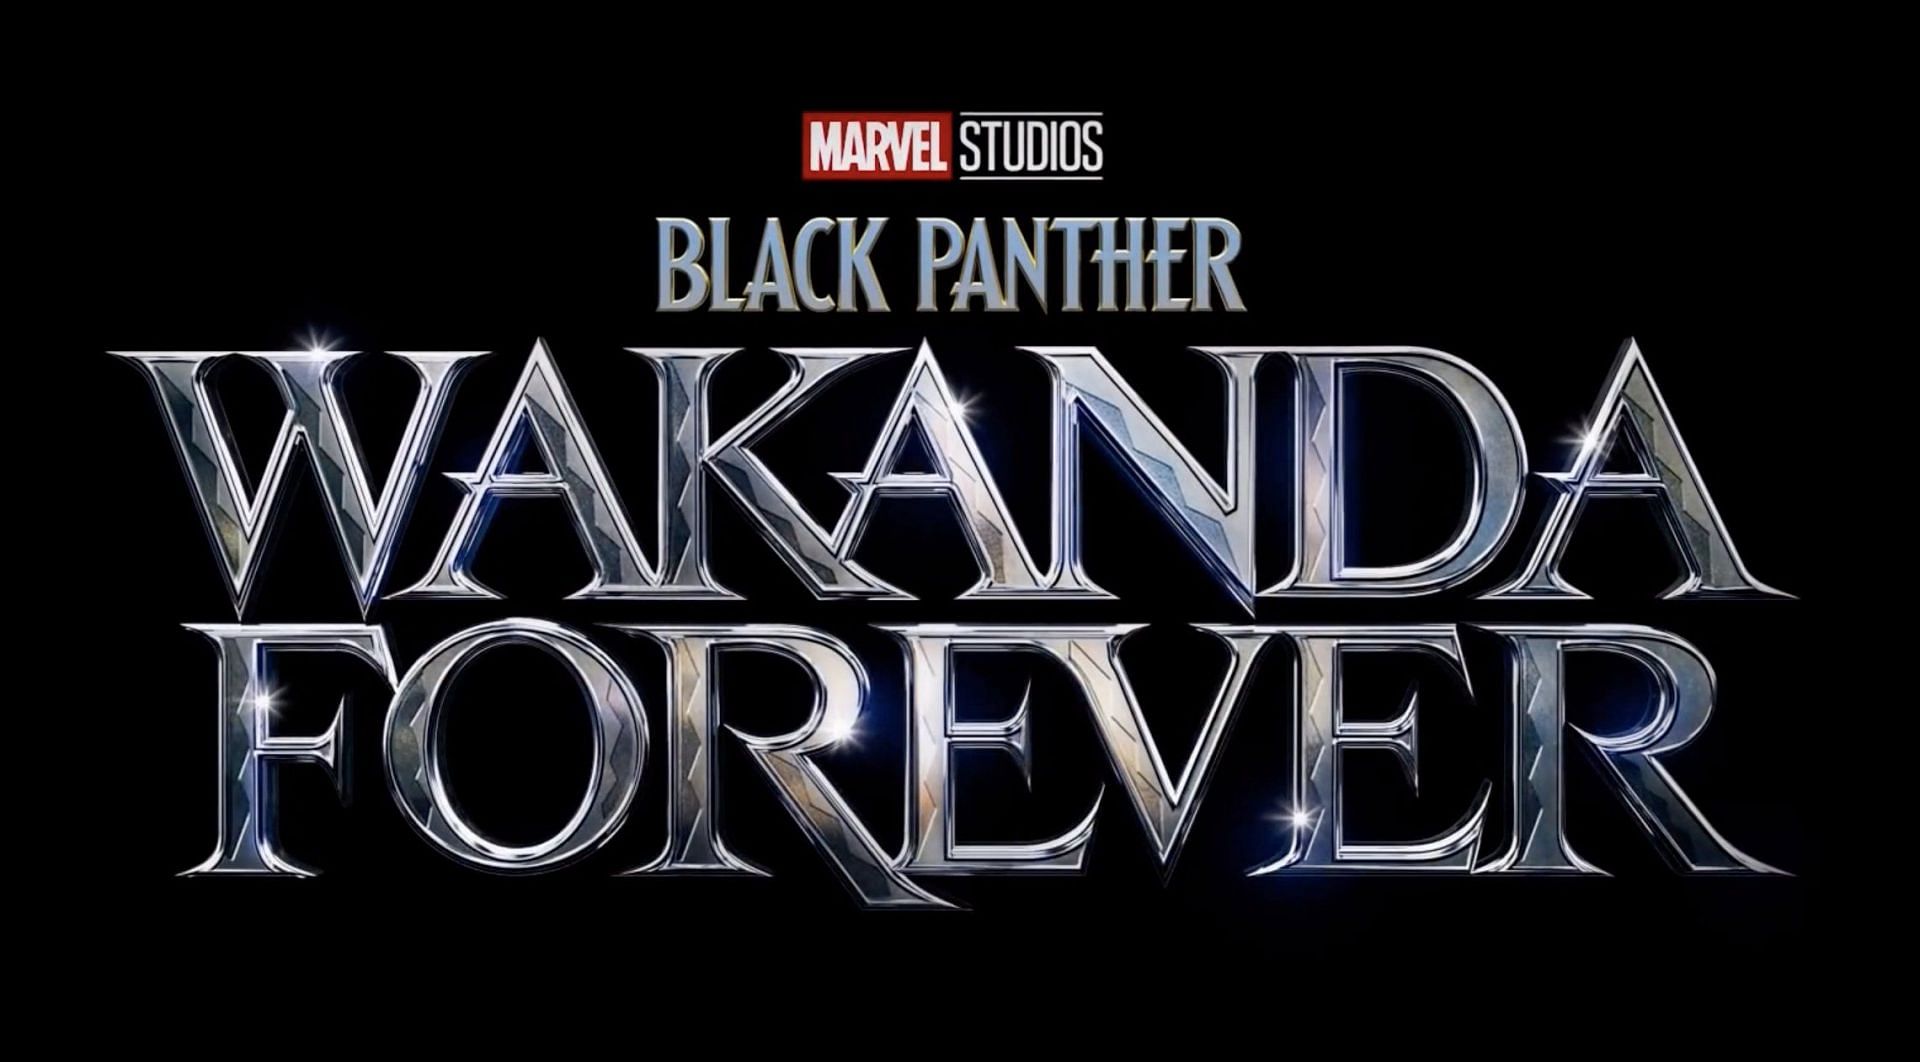 Black Panther: Wakanda Forever releases in theatres on November 11, 2022 (Image via Marvel Studios)